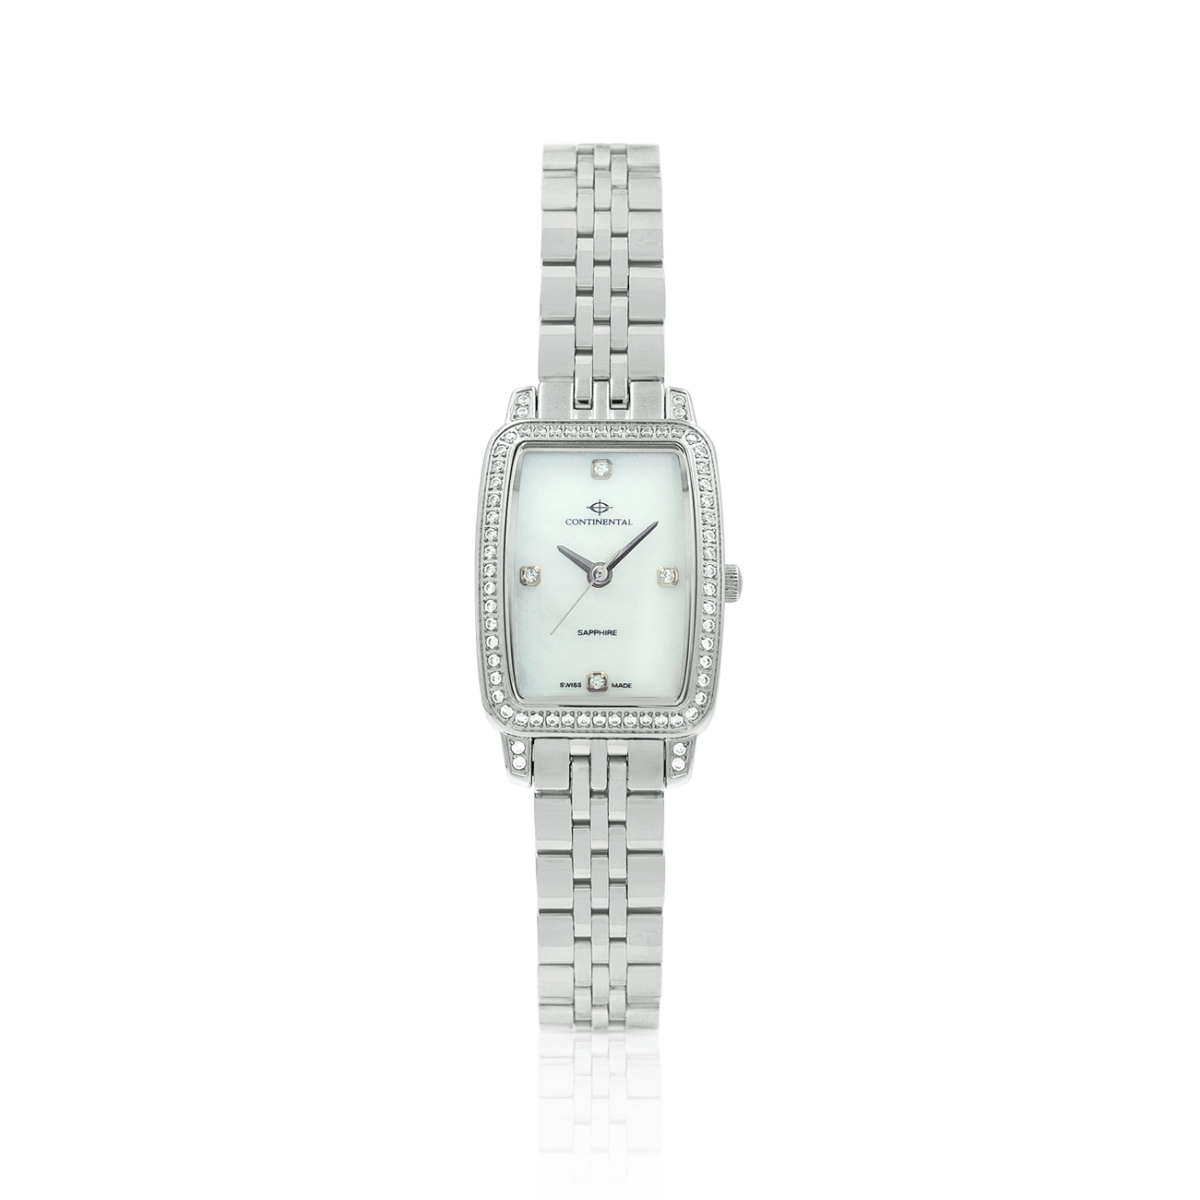 Continental Ladies Dress Watch 20351-LT101501 - front view